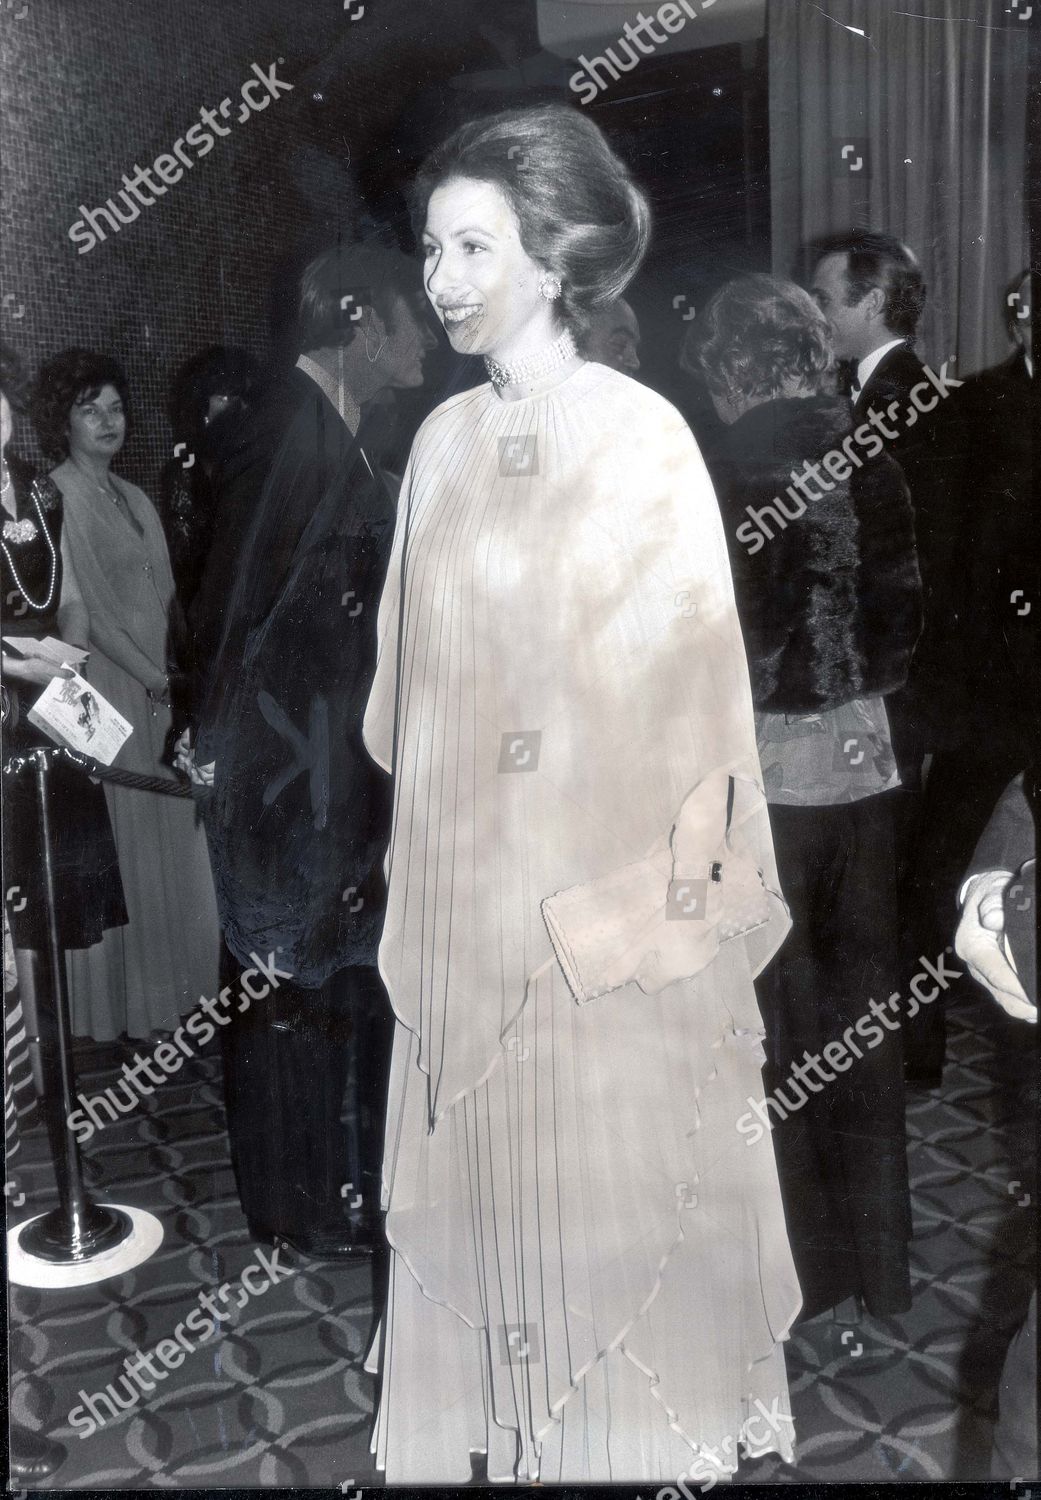 princess-anne-now-princess-royal-november-1978-in-shimmering-pleaed-dress-and-fourt-strand-pearl-choker-princess-anne-swept-all-before-her-last-night-she-was-the-guest-of-honour-right-at-the-first-night-in-londons-leicester-square-theatre-of-t-shutterstock-editorial-890879a.jpg